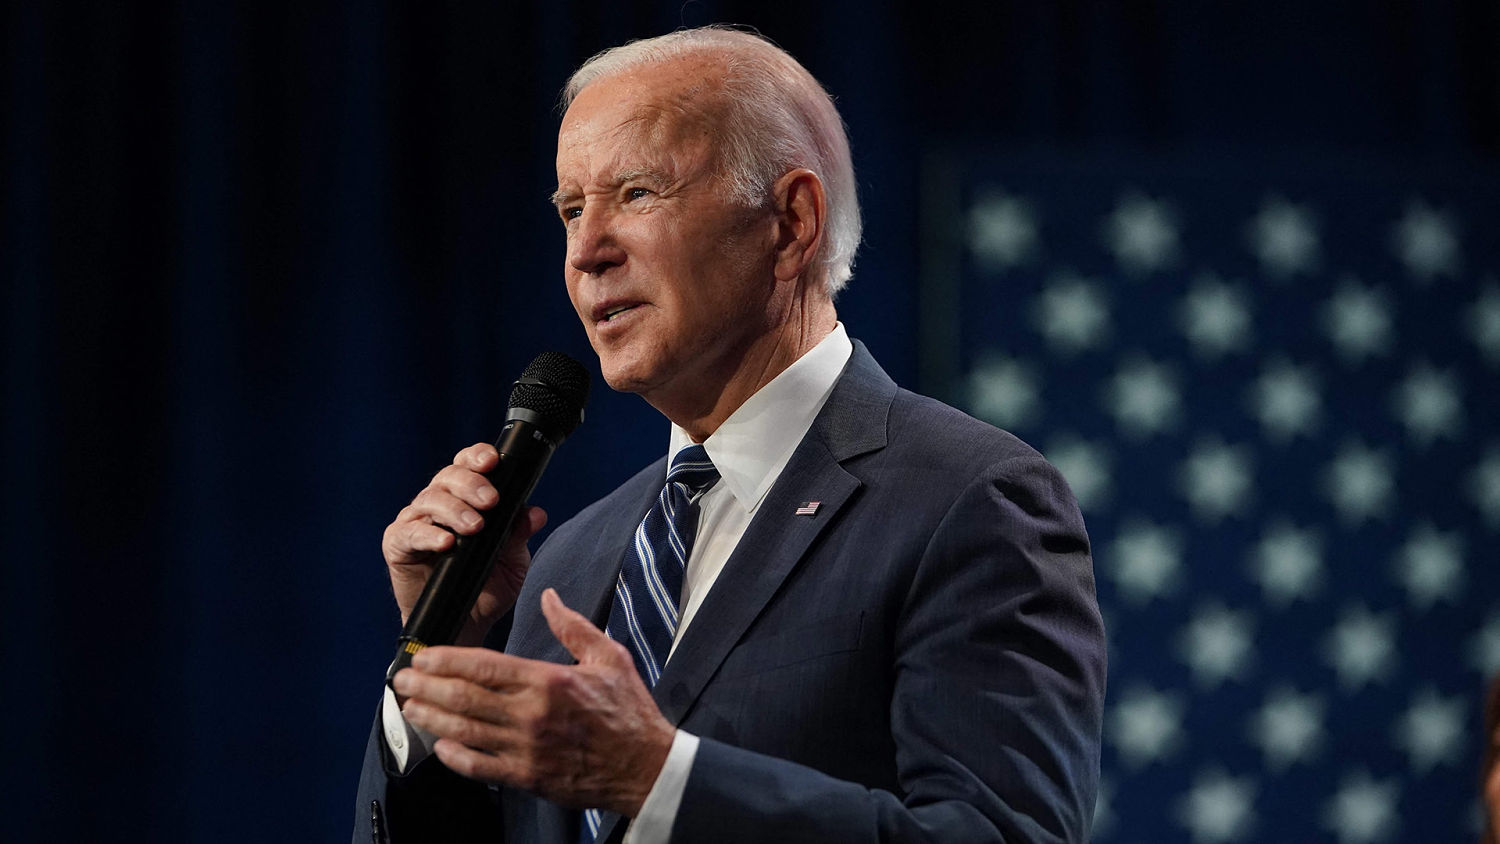 Biden speaks at the National Museum of African American History and Culture